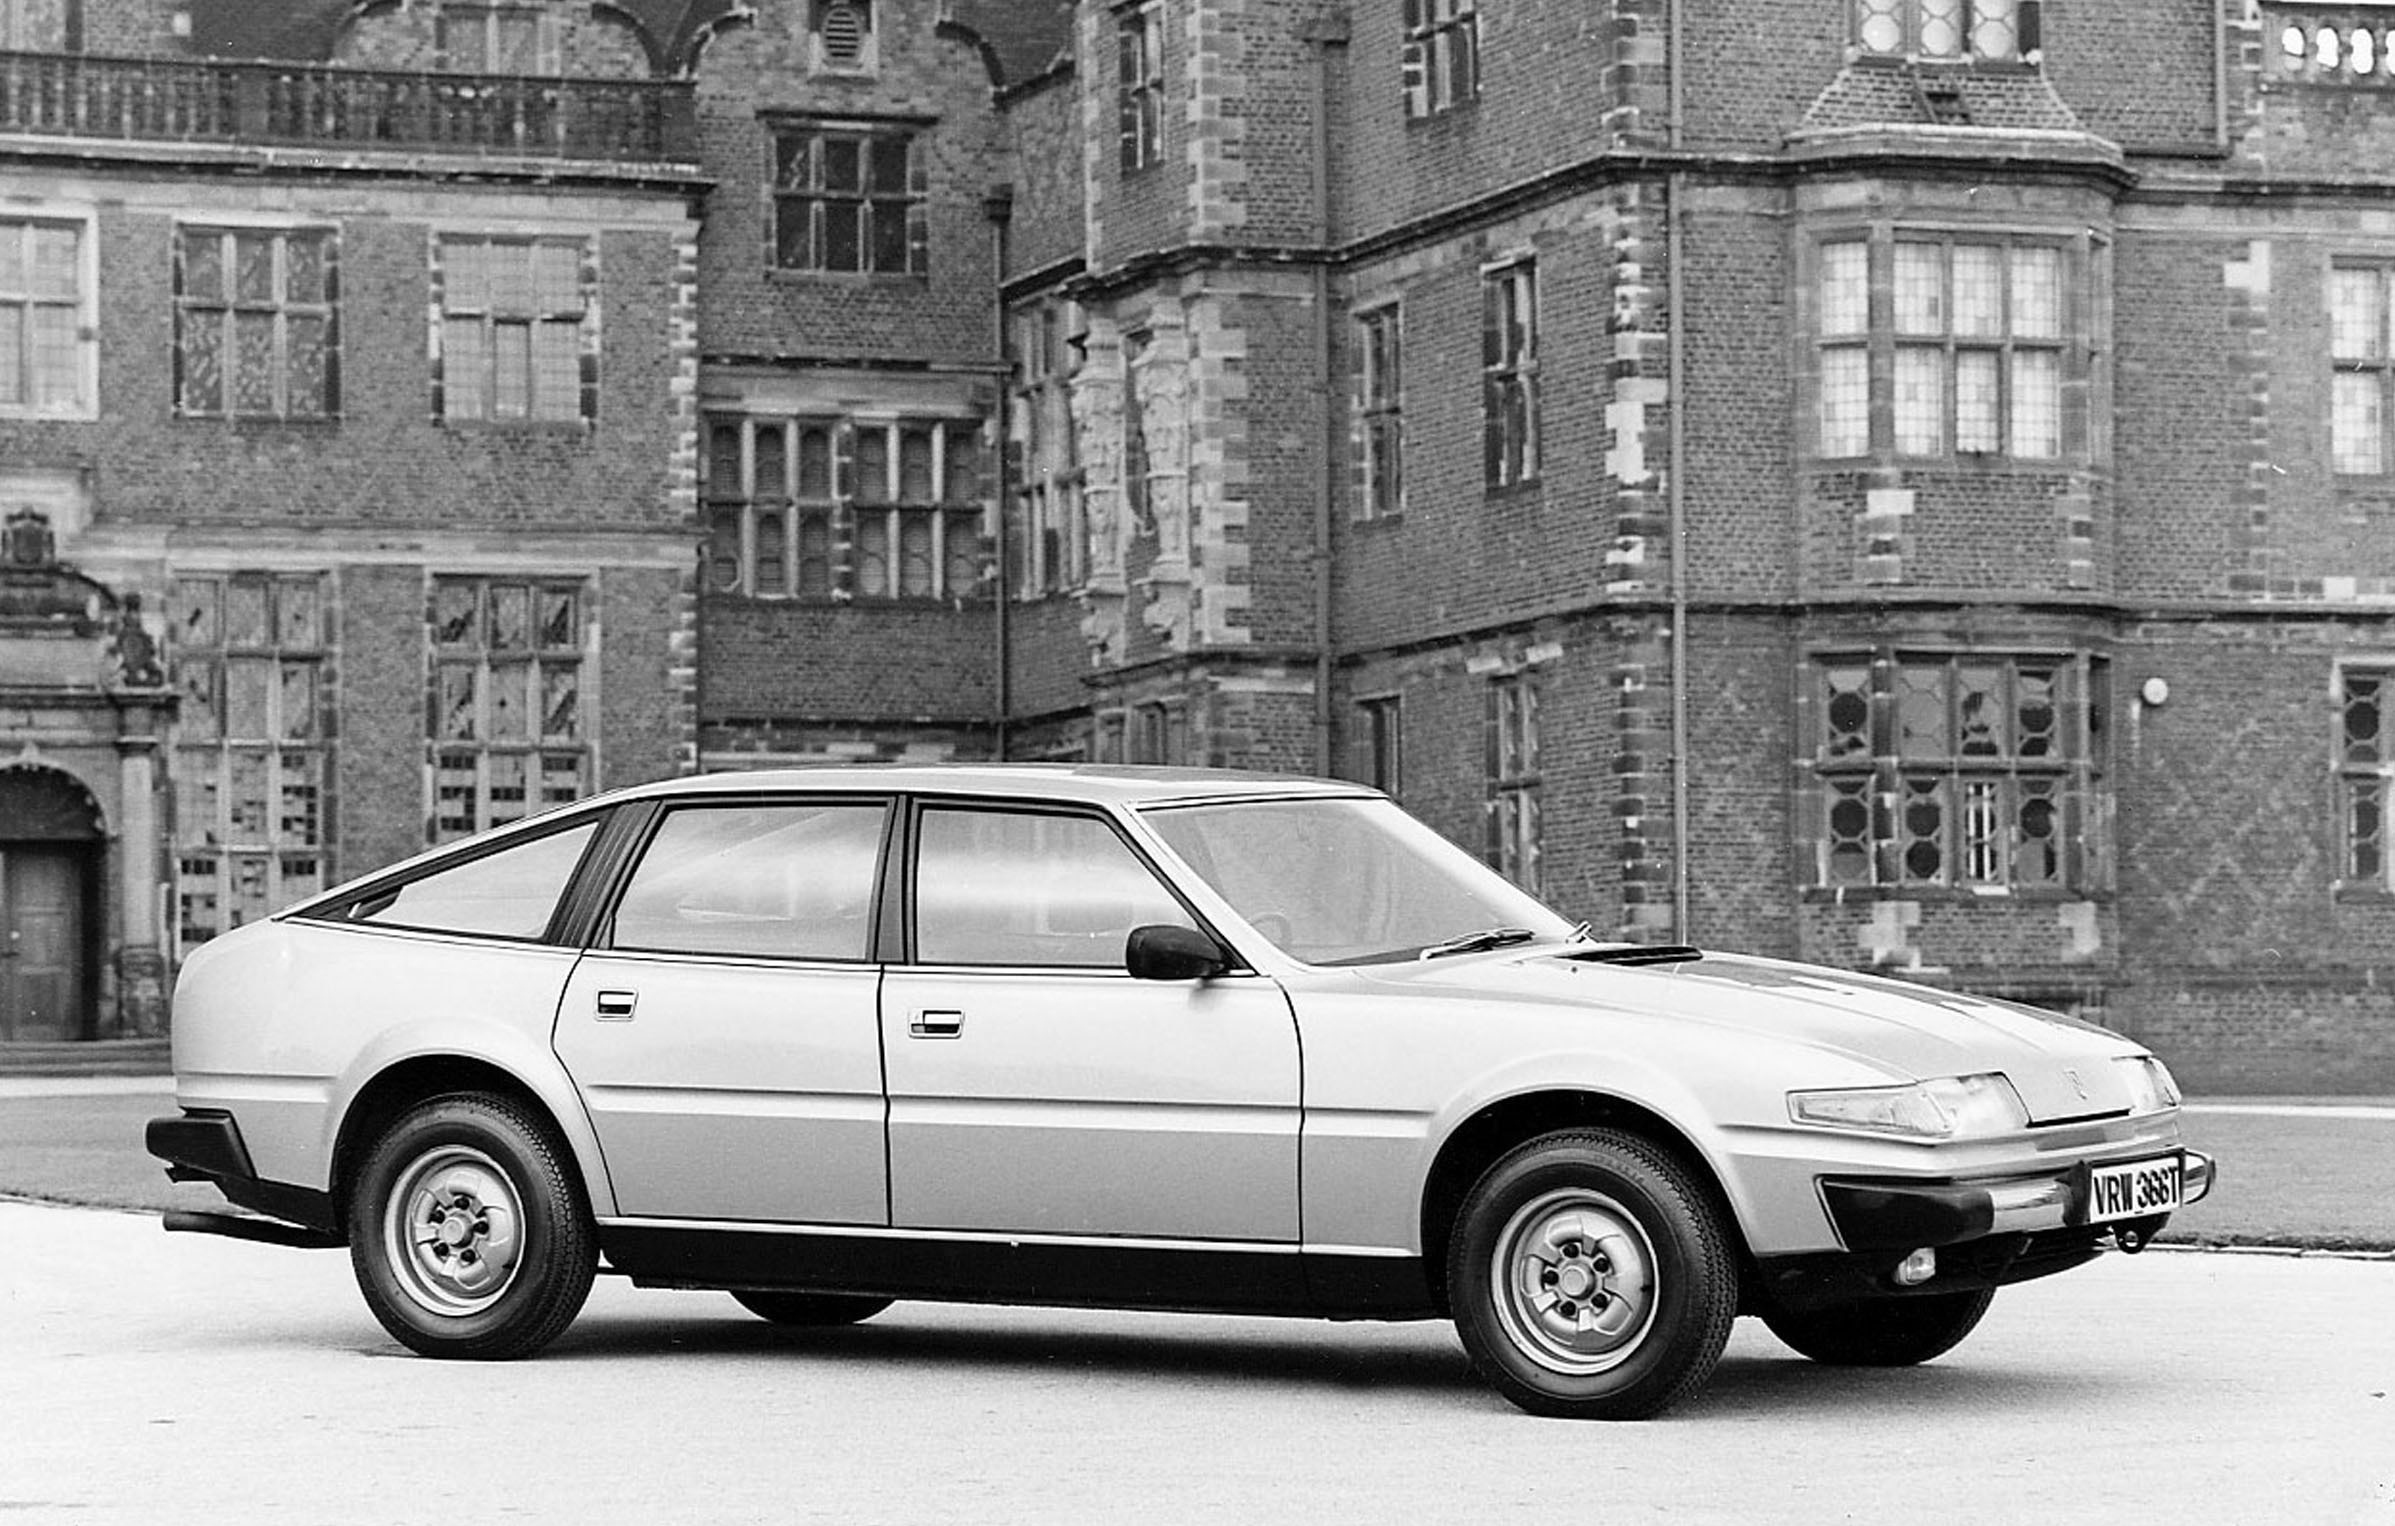 History of the Rover SD1